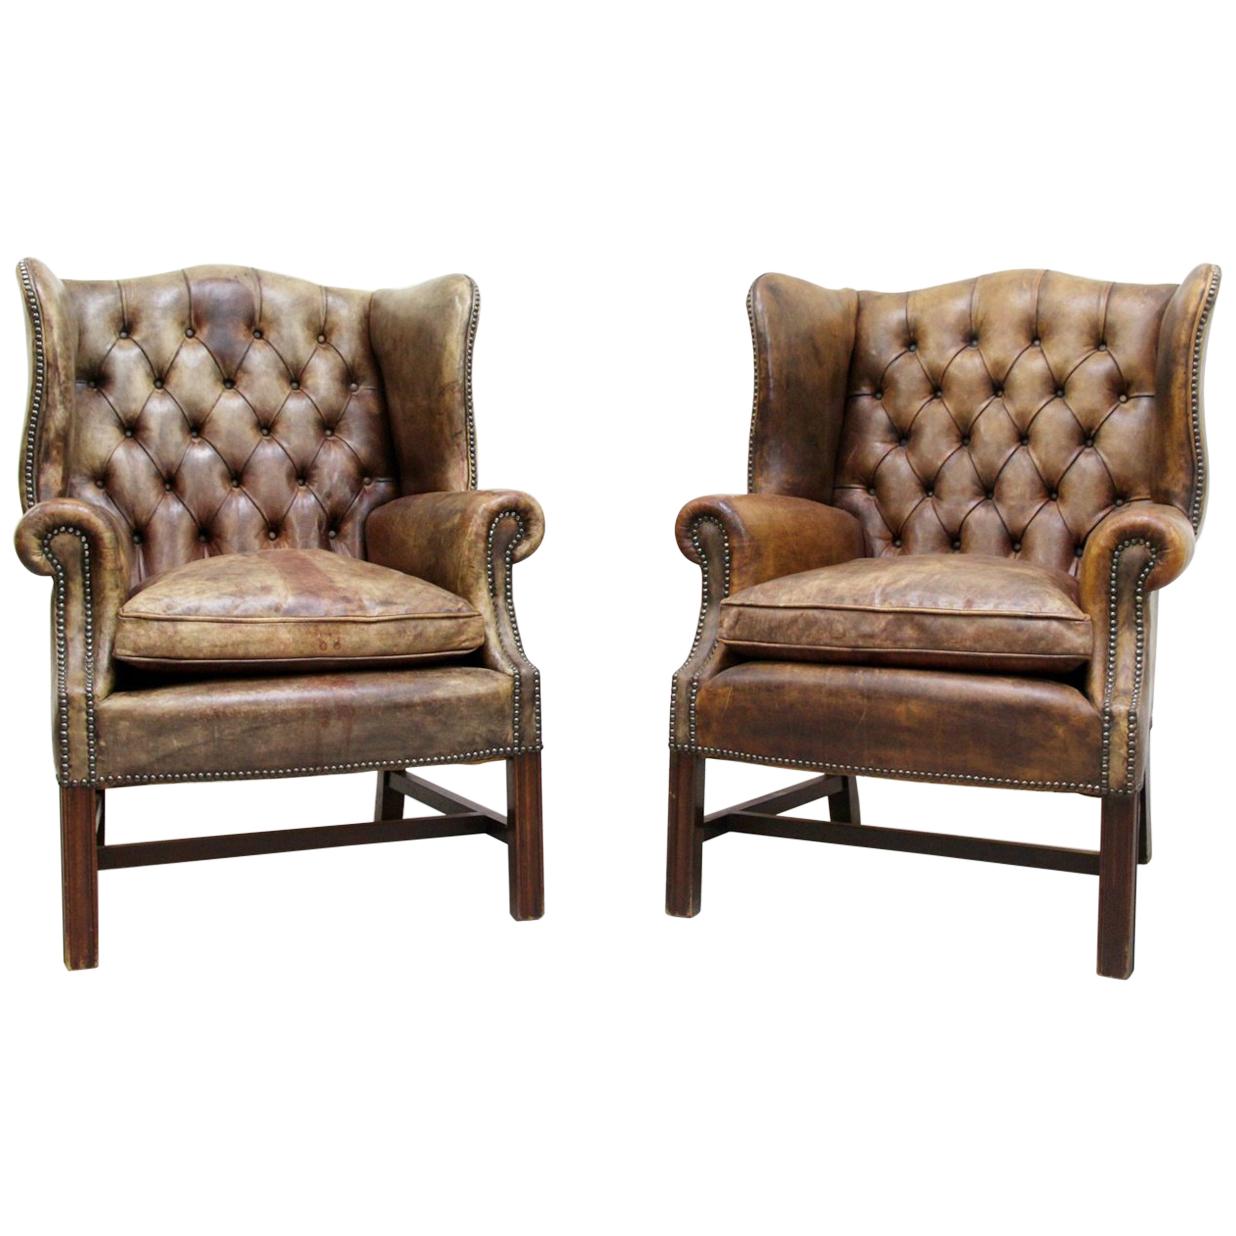 2-Chesterfield Armchair Armchair Wing Chair Antique Chair im Angebot